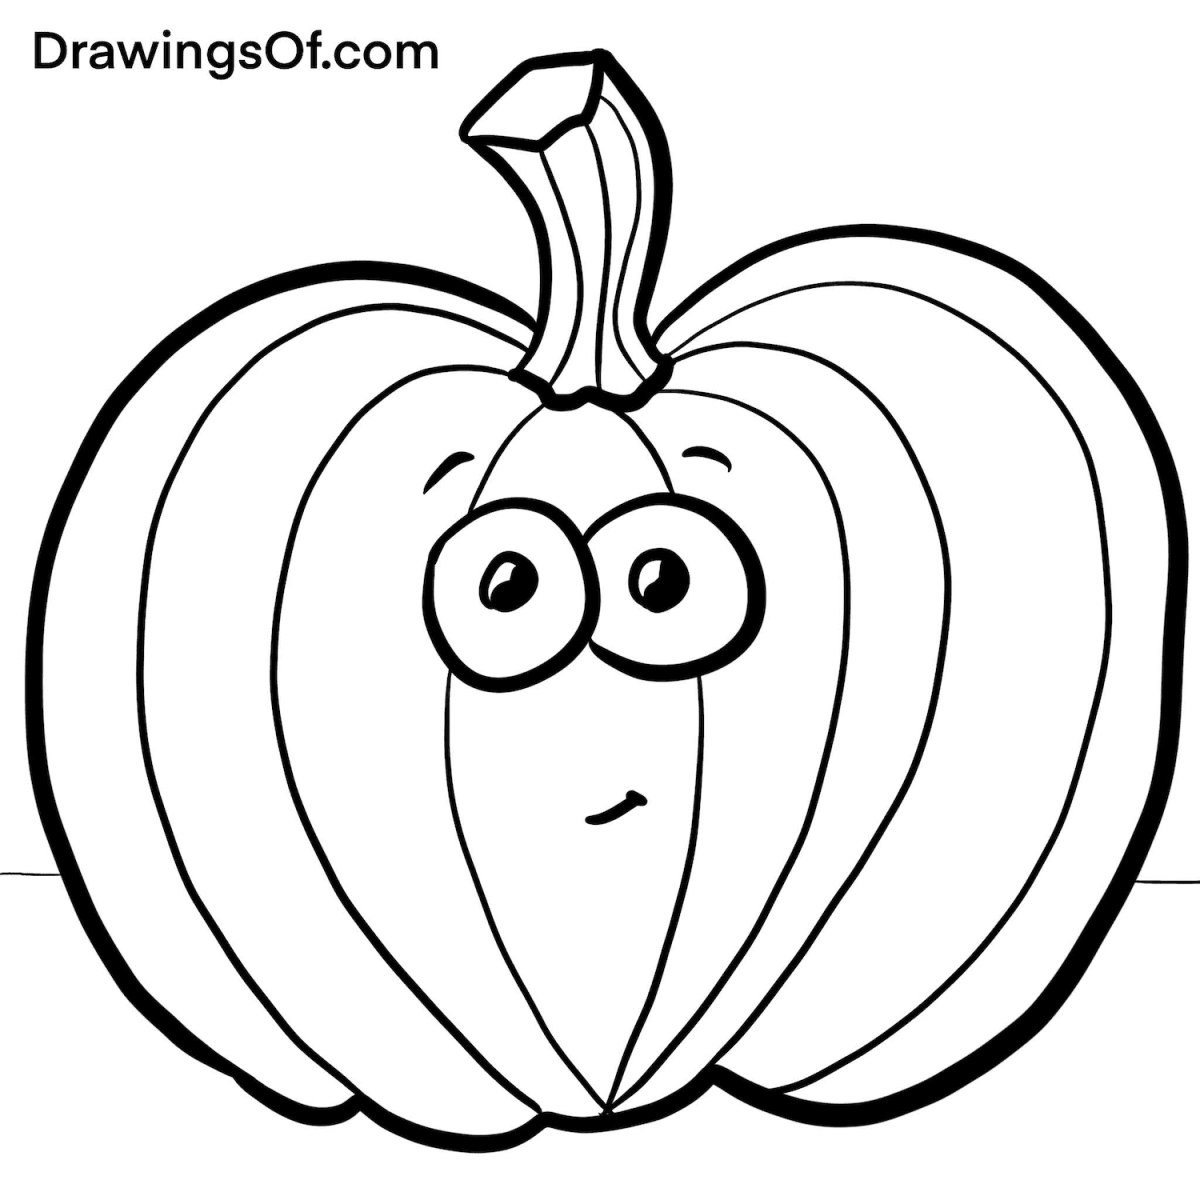 Black and white pumpkin drawing to color